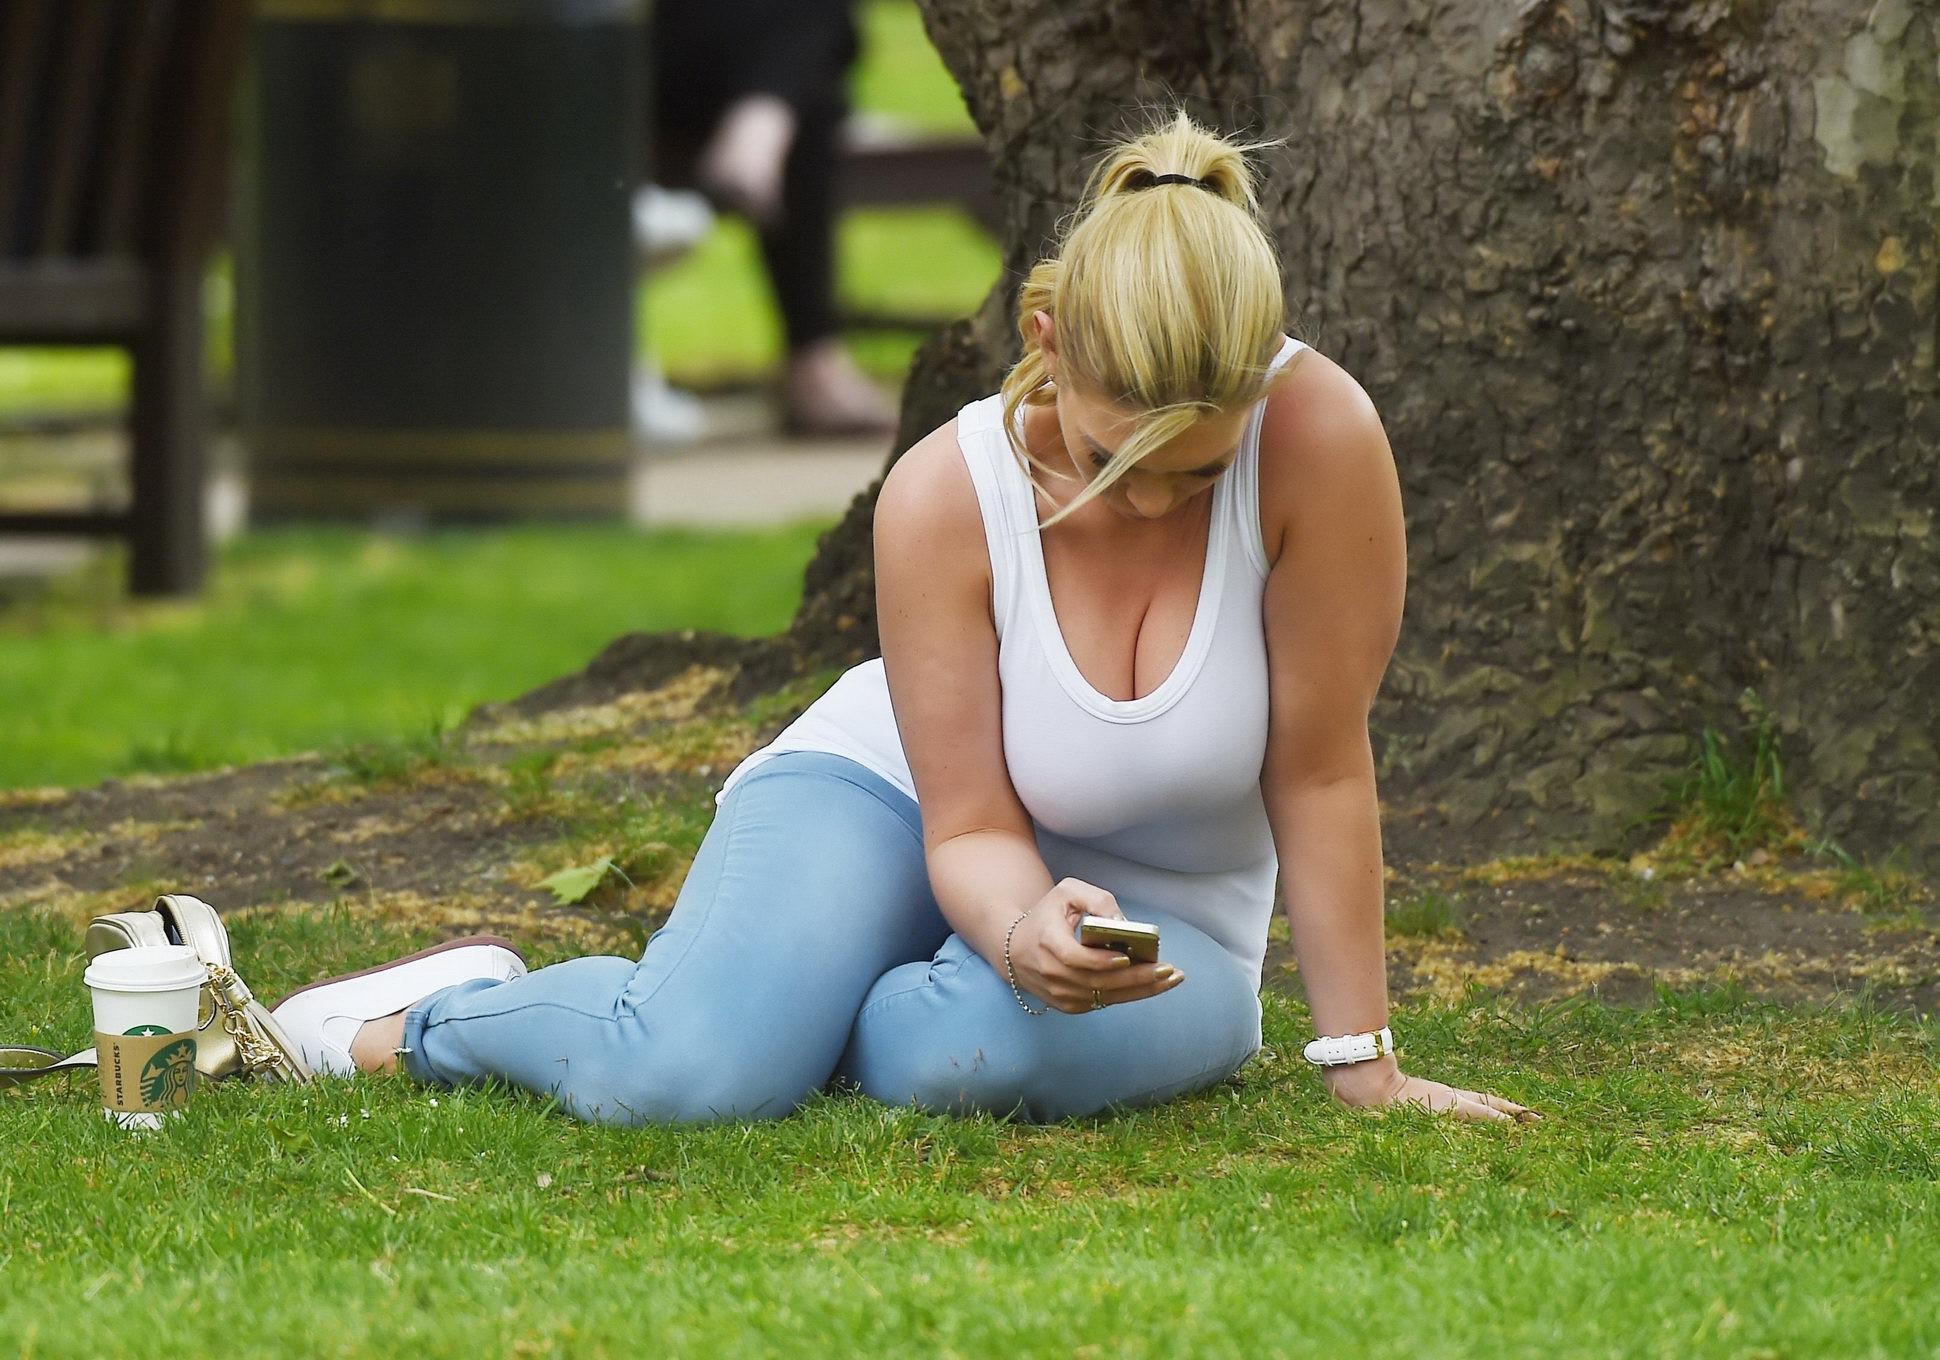 Busty Frankie Essex braless downblouse at a park in London #75162102